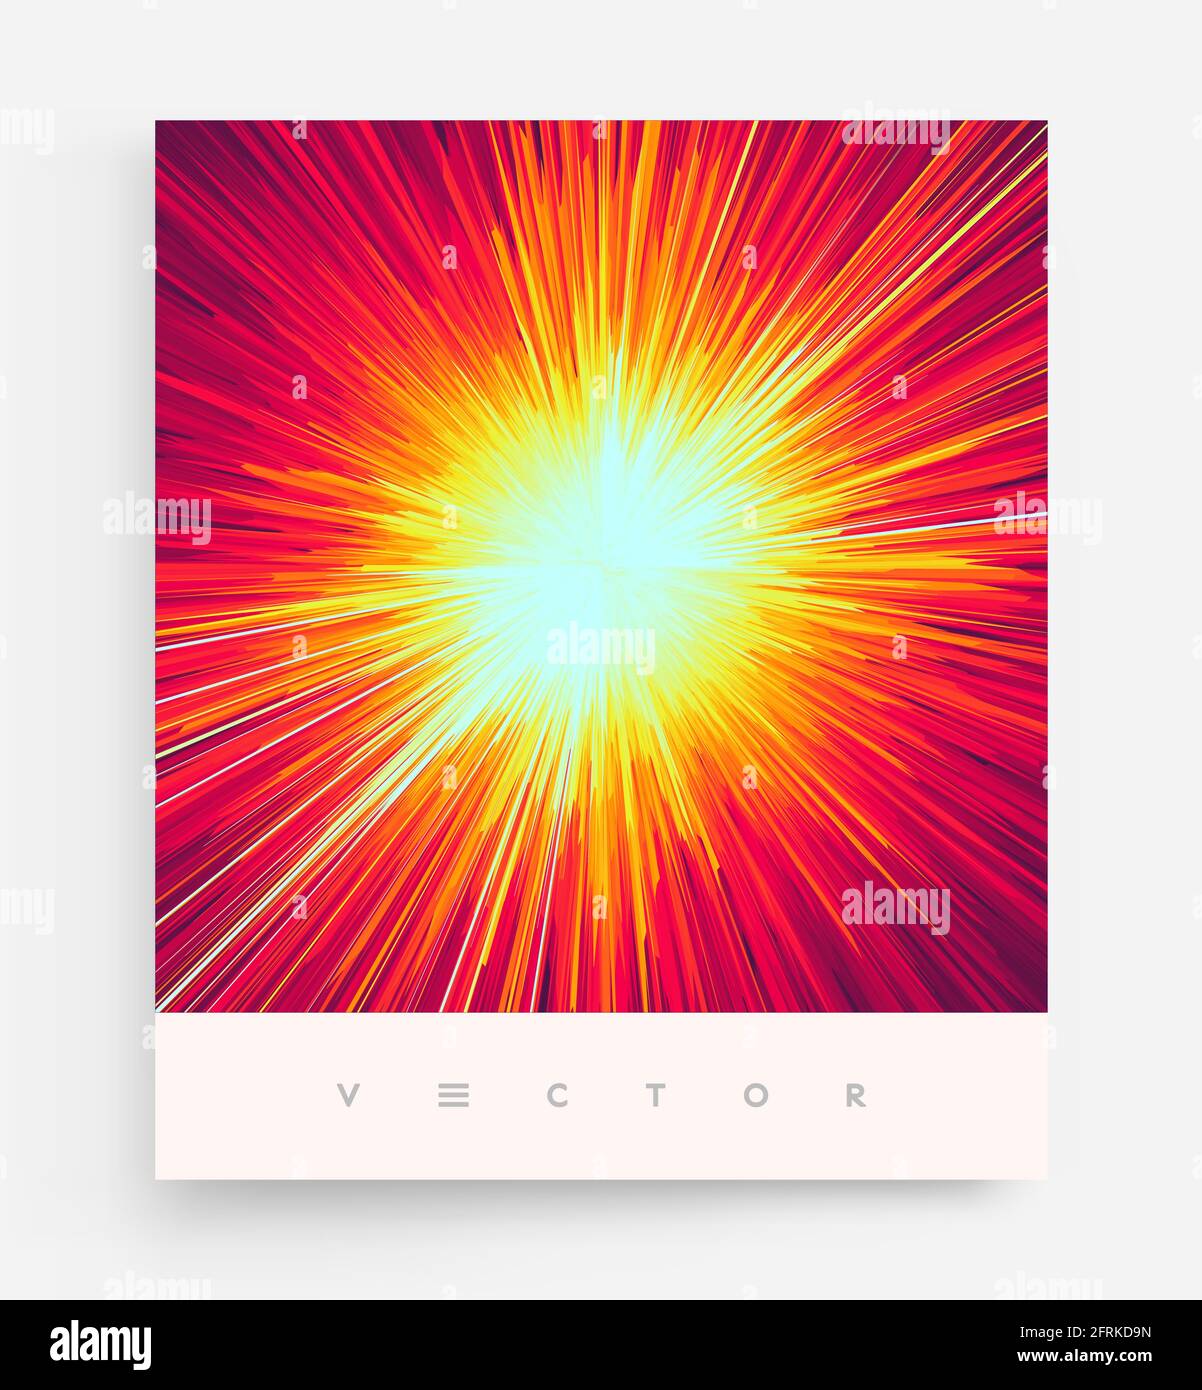 Background with explosion. Starburst dynamic lines. Solar or starlight emission. 3d futuristic technology style. Vector illustration. Stock Vector